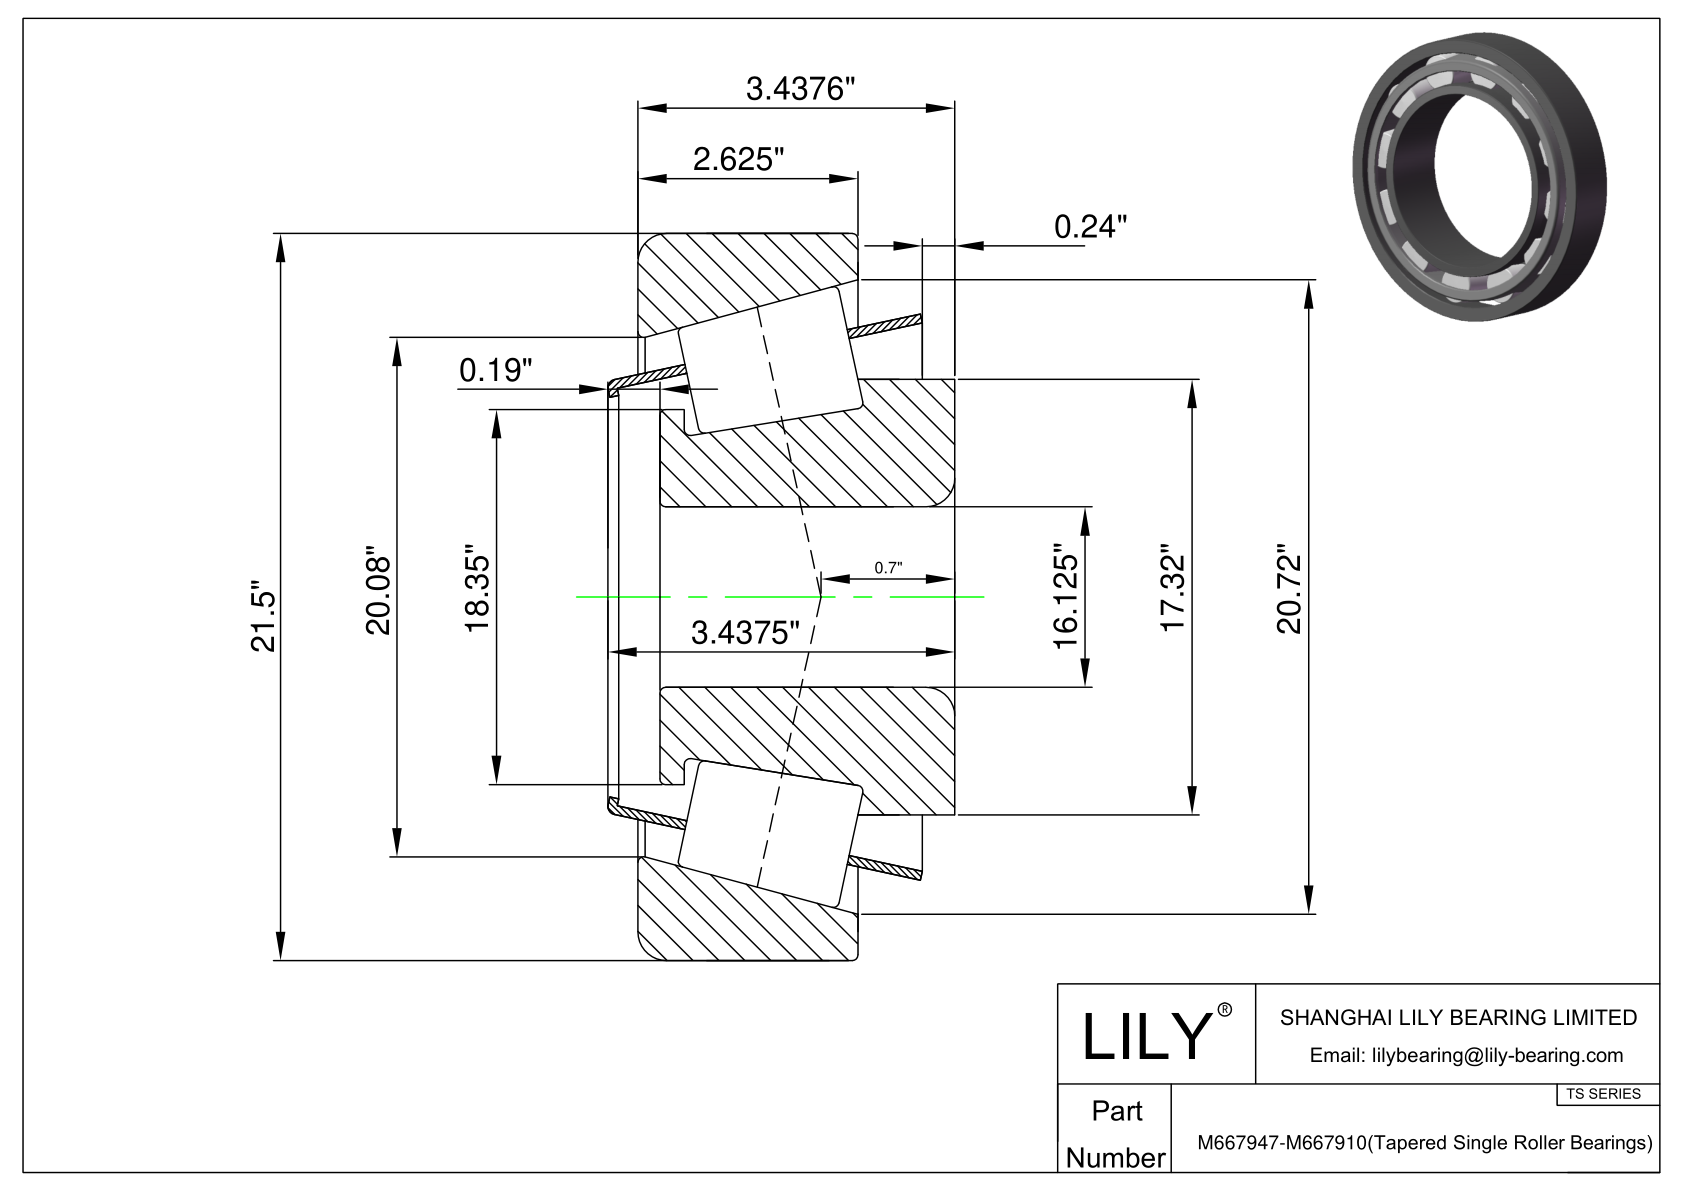 M667947-M667910 TS (Tapered Single Roller Bearings) (Imperial) cad drawing